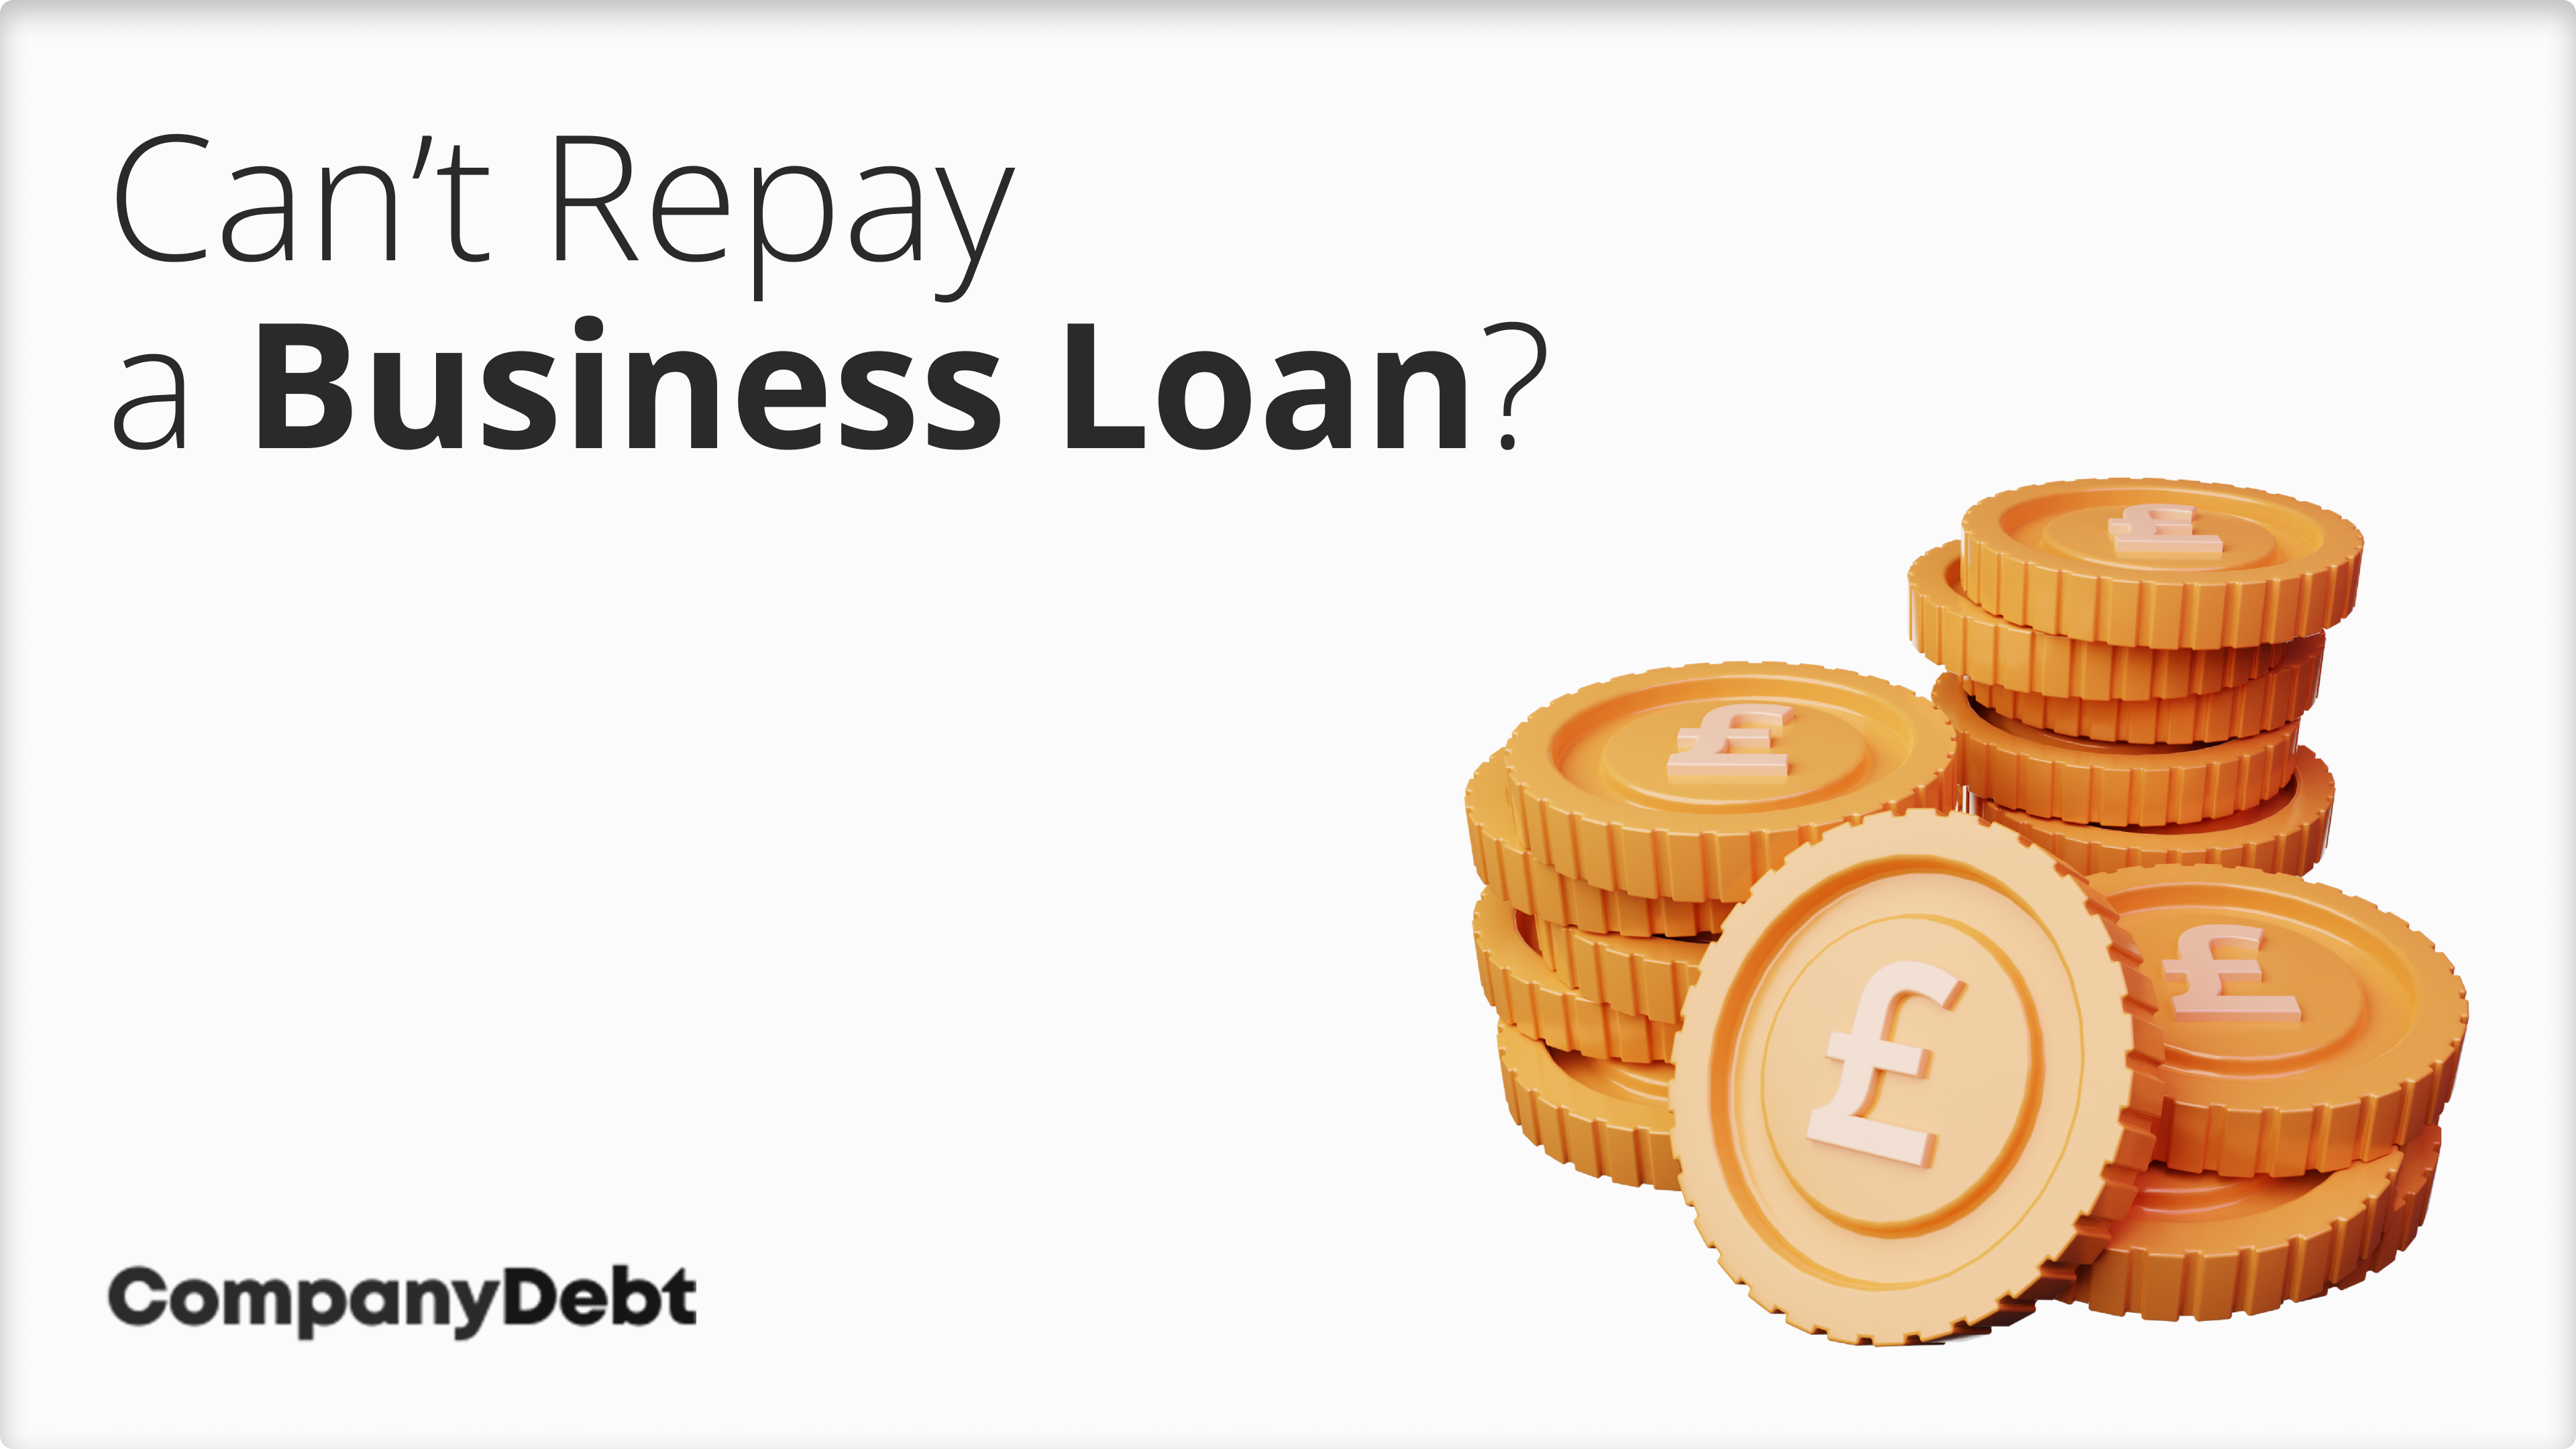 Cant-Afford-to-Repay-a-Business-Loan_